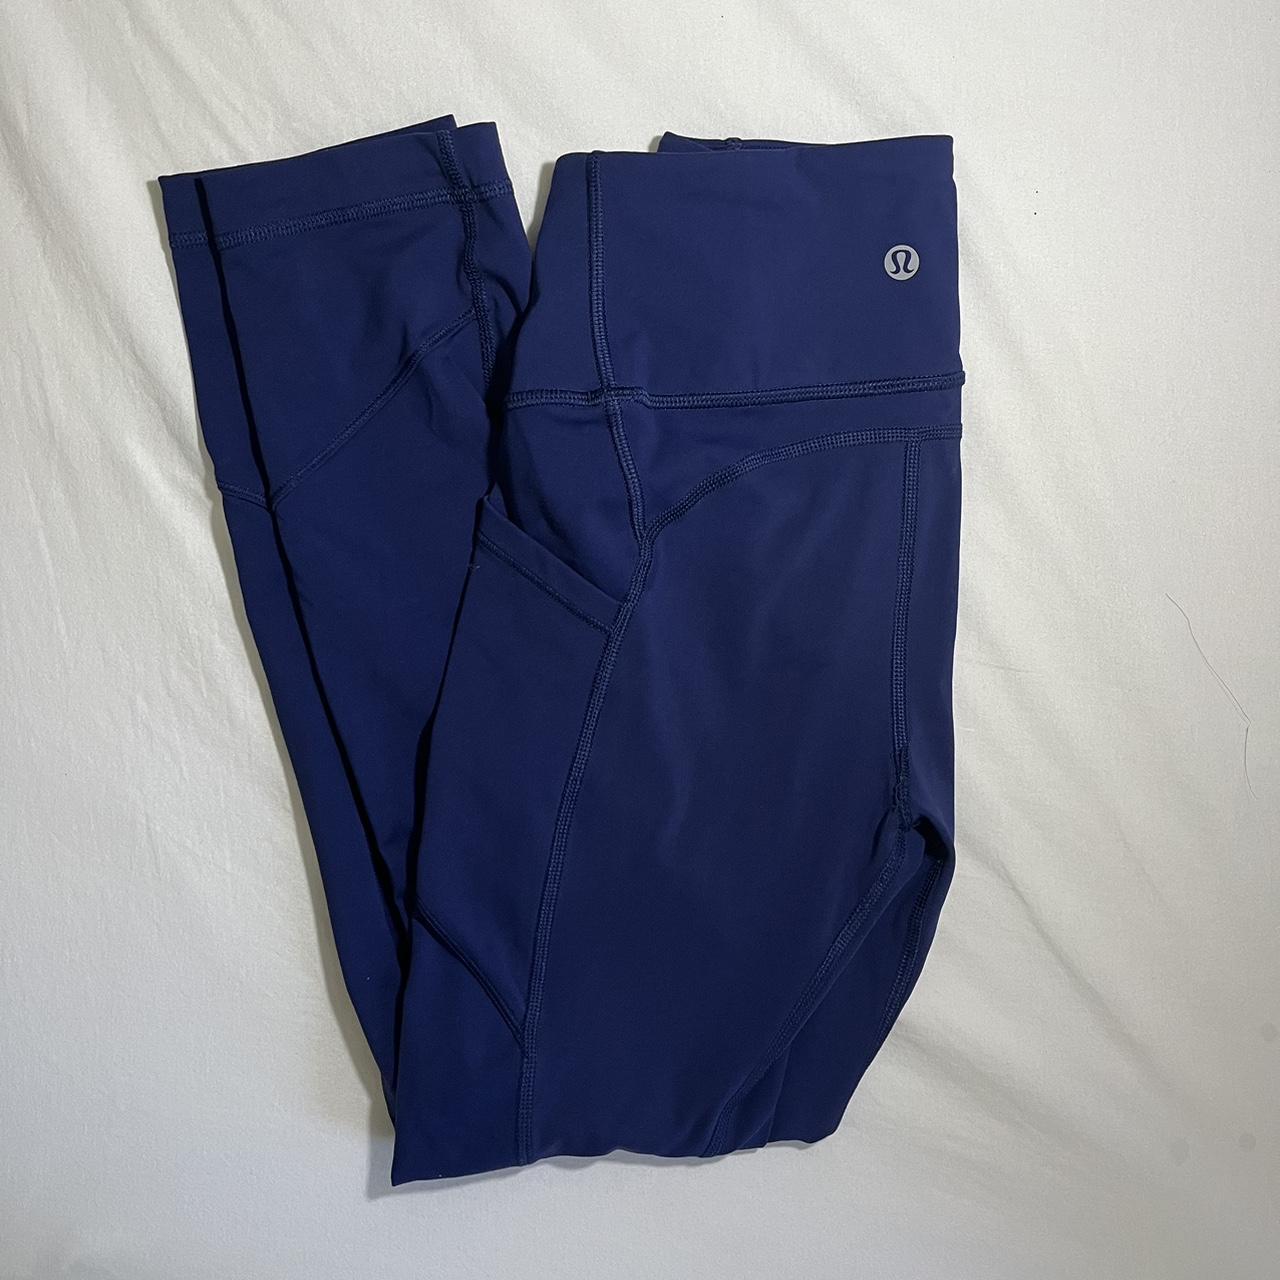 Lululemon Fast and Free High-Rise crop 23” with